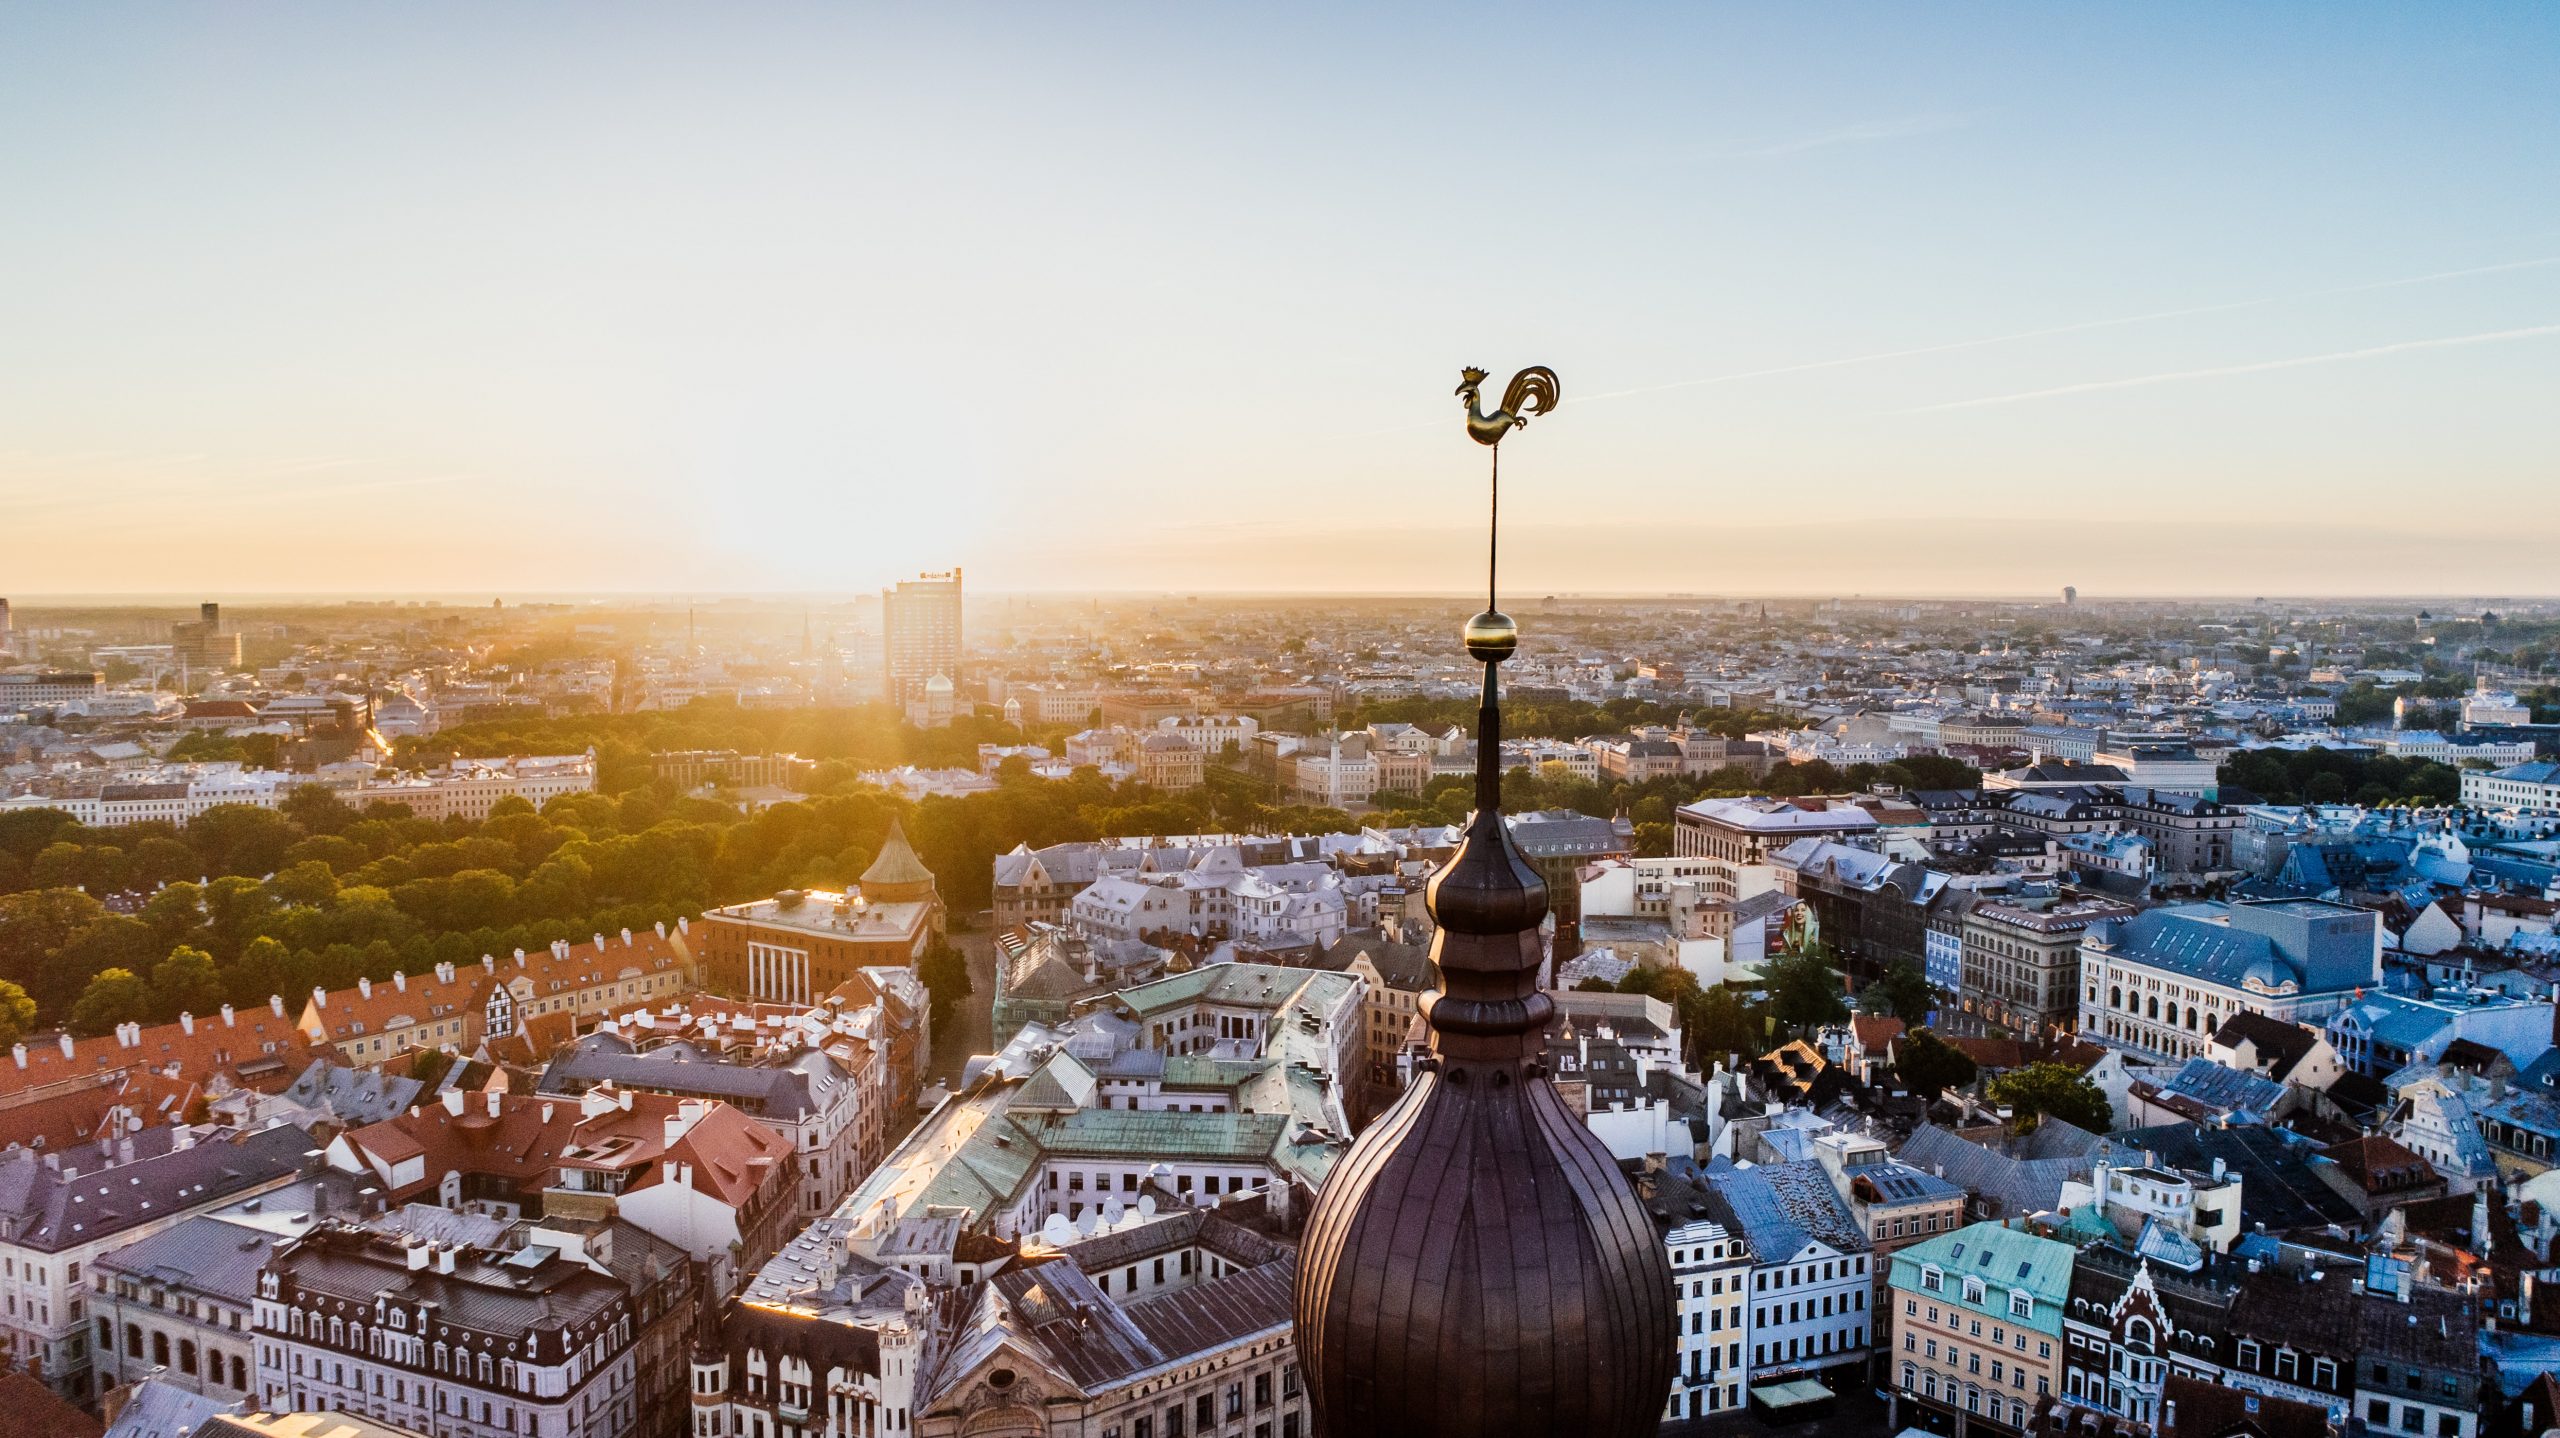 A view of a city from the top of a building in Riga.